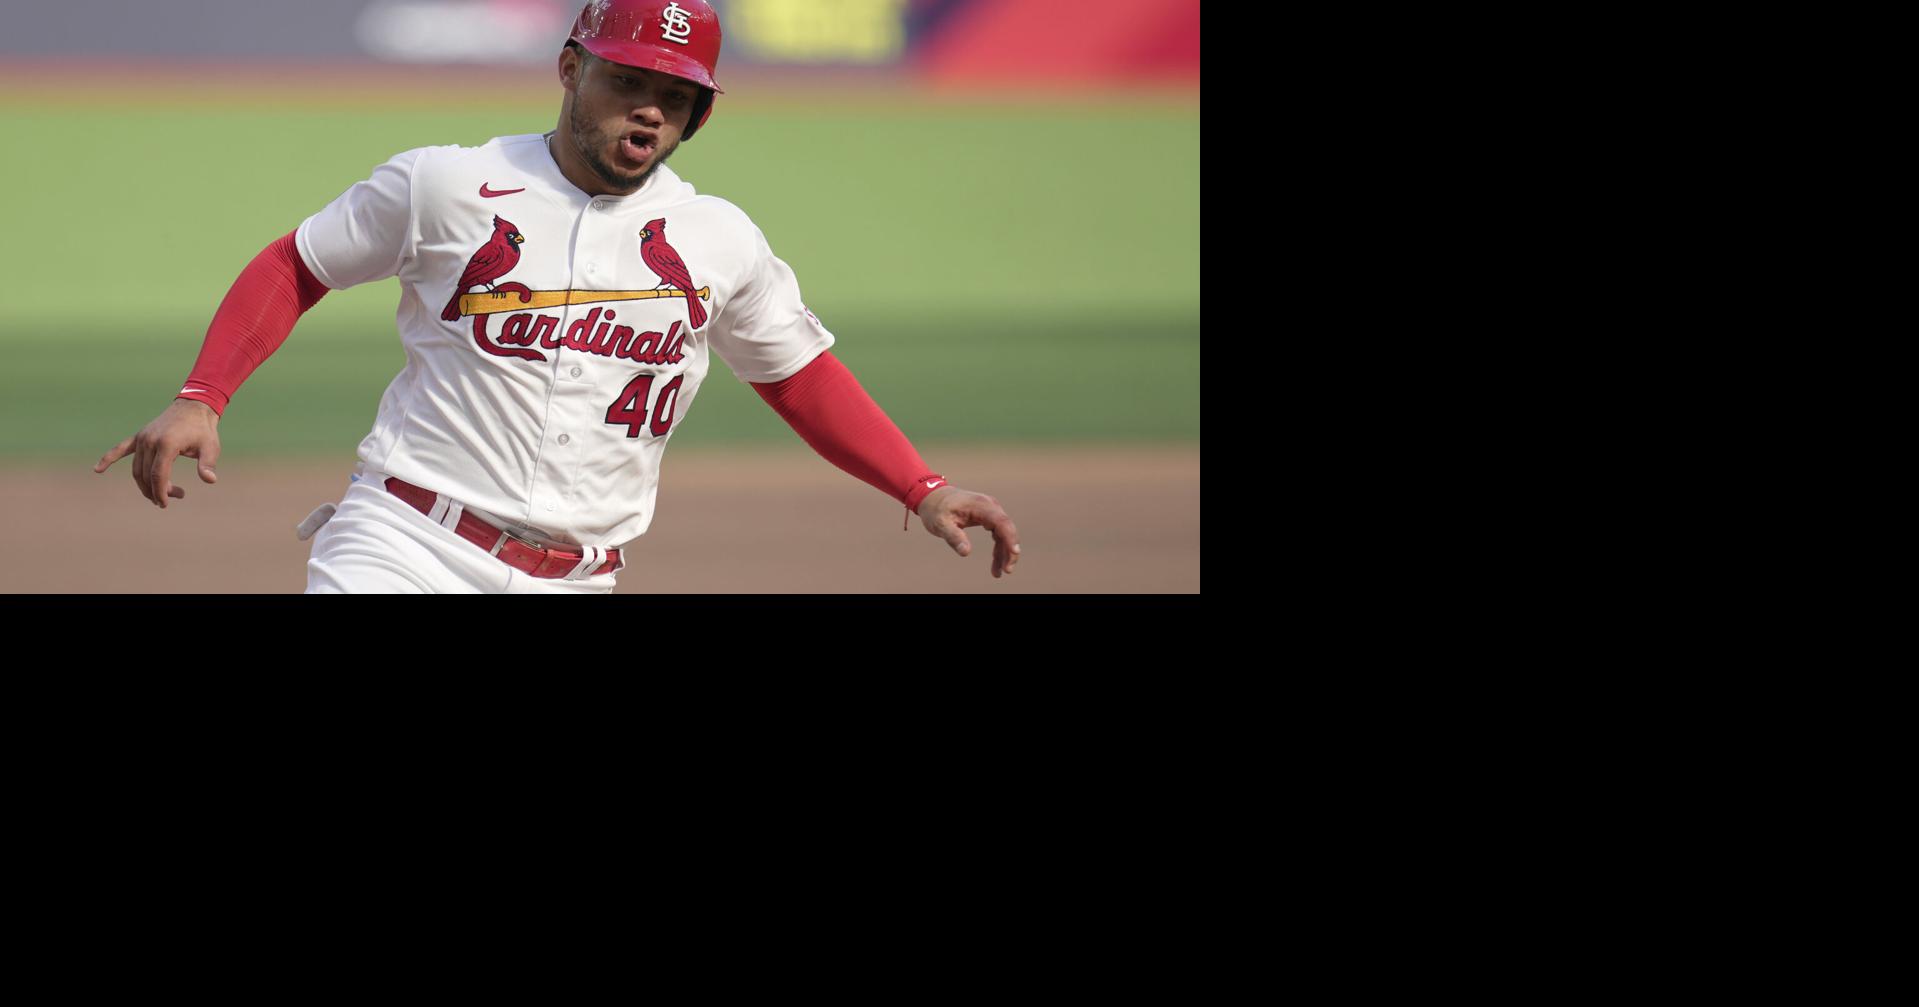 St. Louis Cardinals and delegation head to London